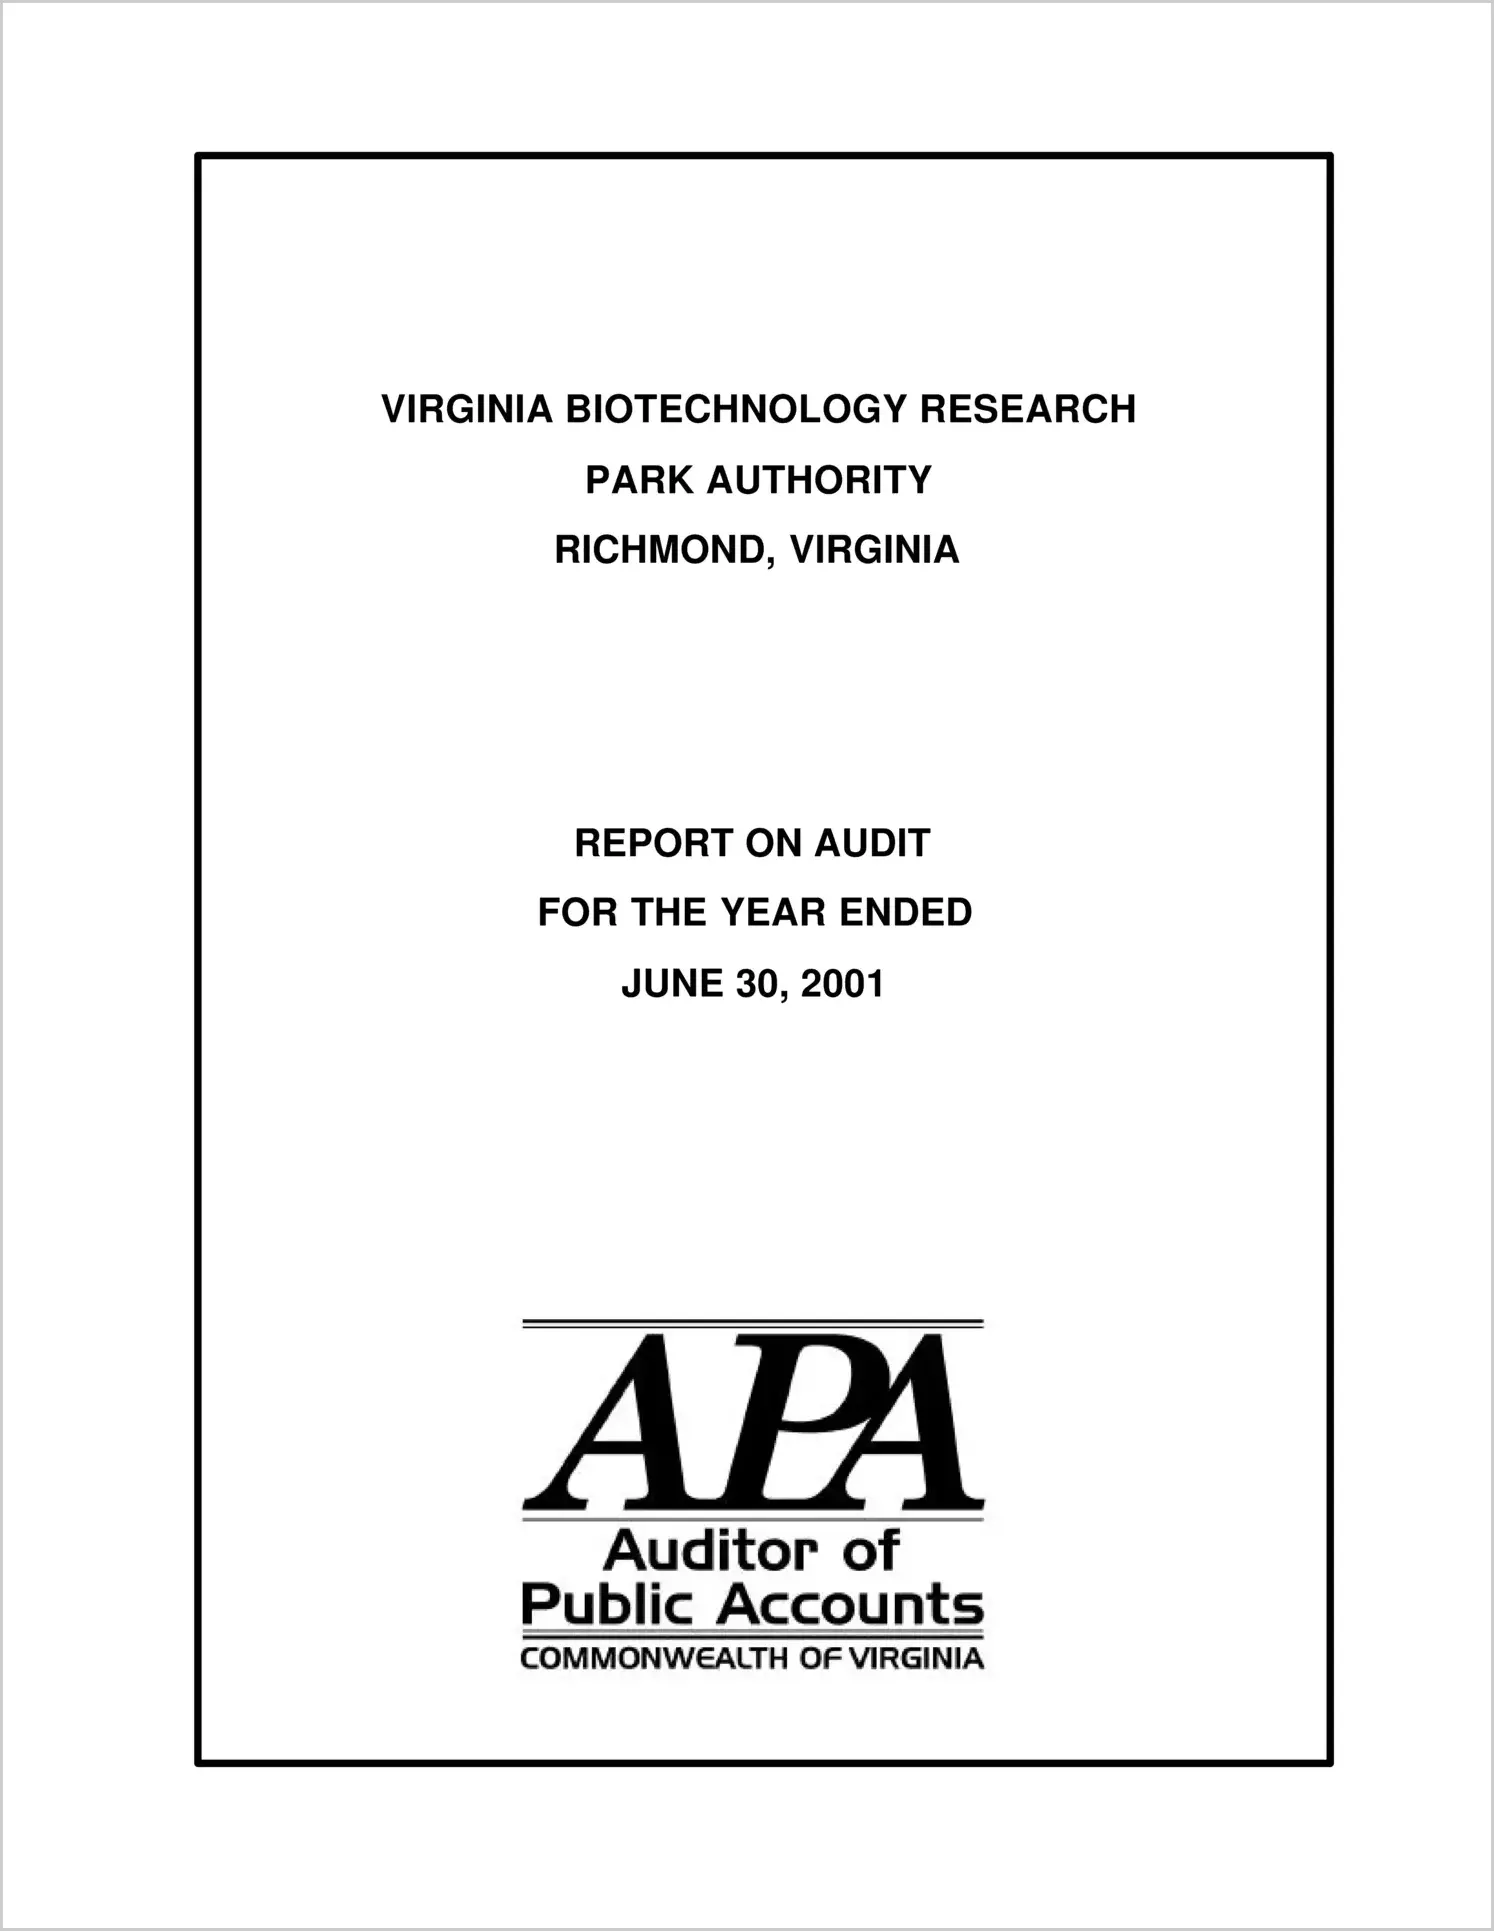 Virginia Biotechnology Research Park Authority for the year ended June 30, 2001